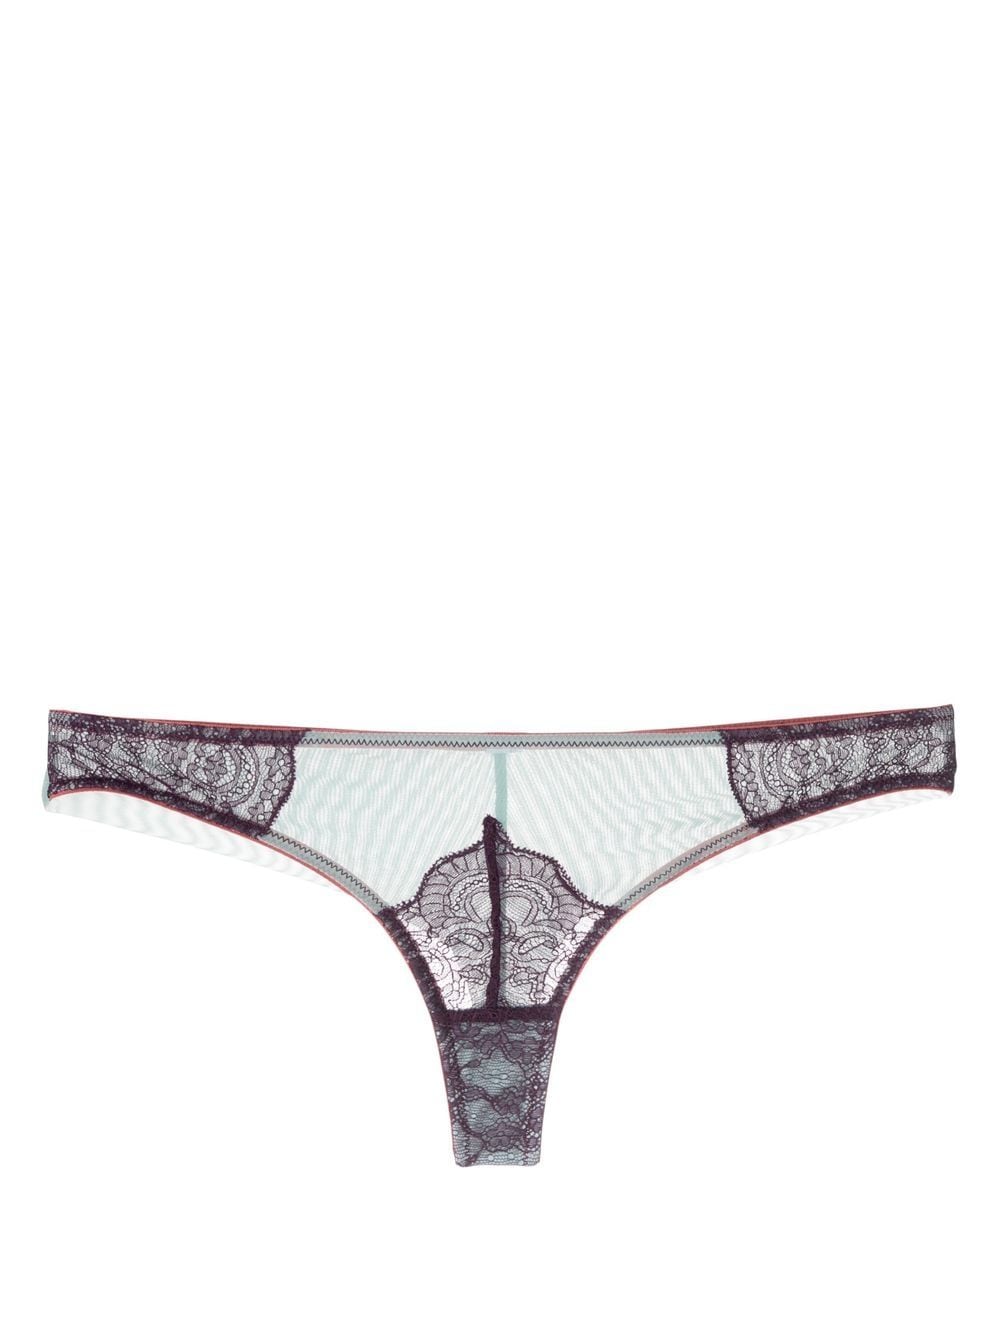 Dora Larsen + Net Sustain Enid Recycled Lace And Tulle Briefs In Blue